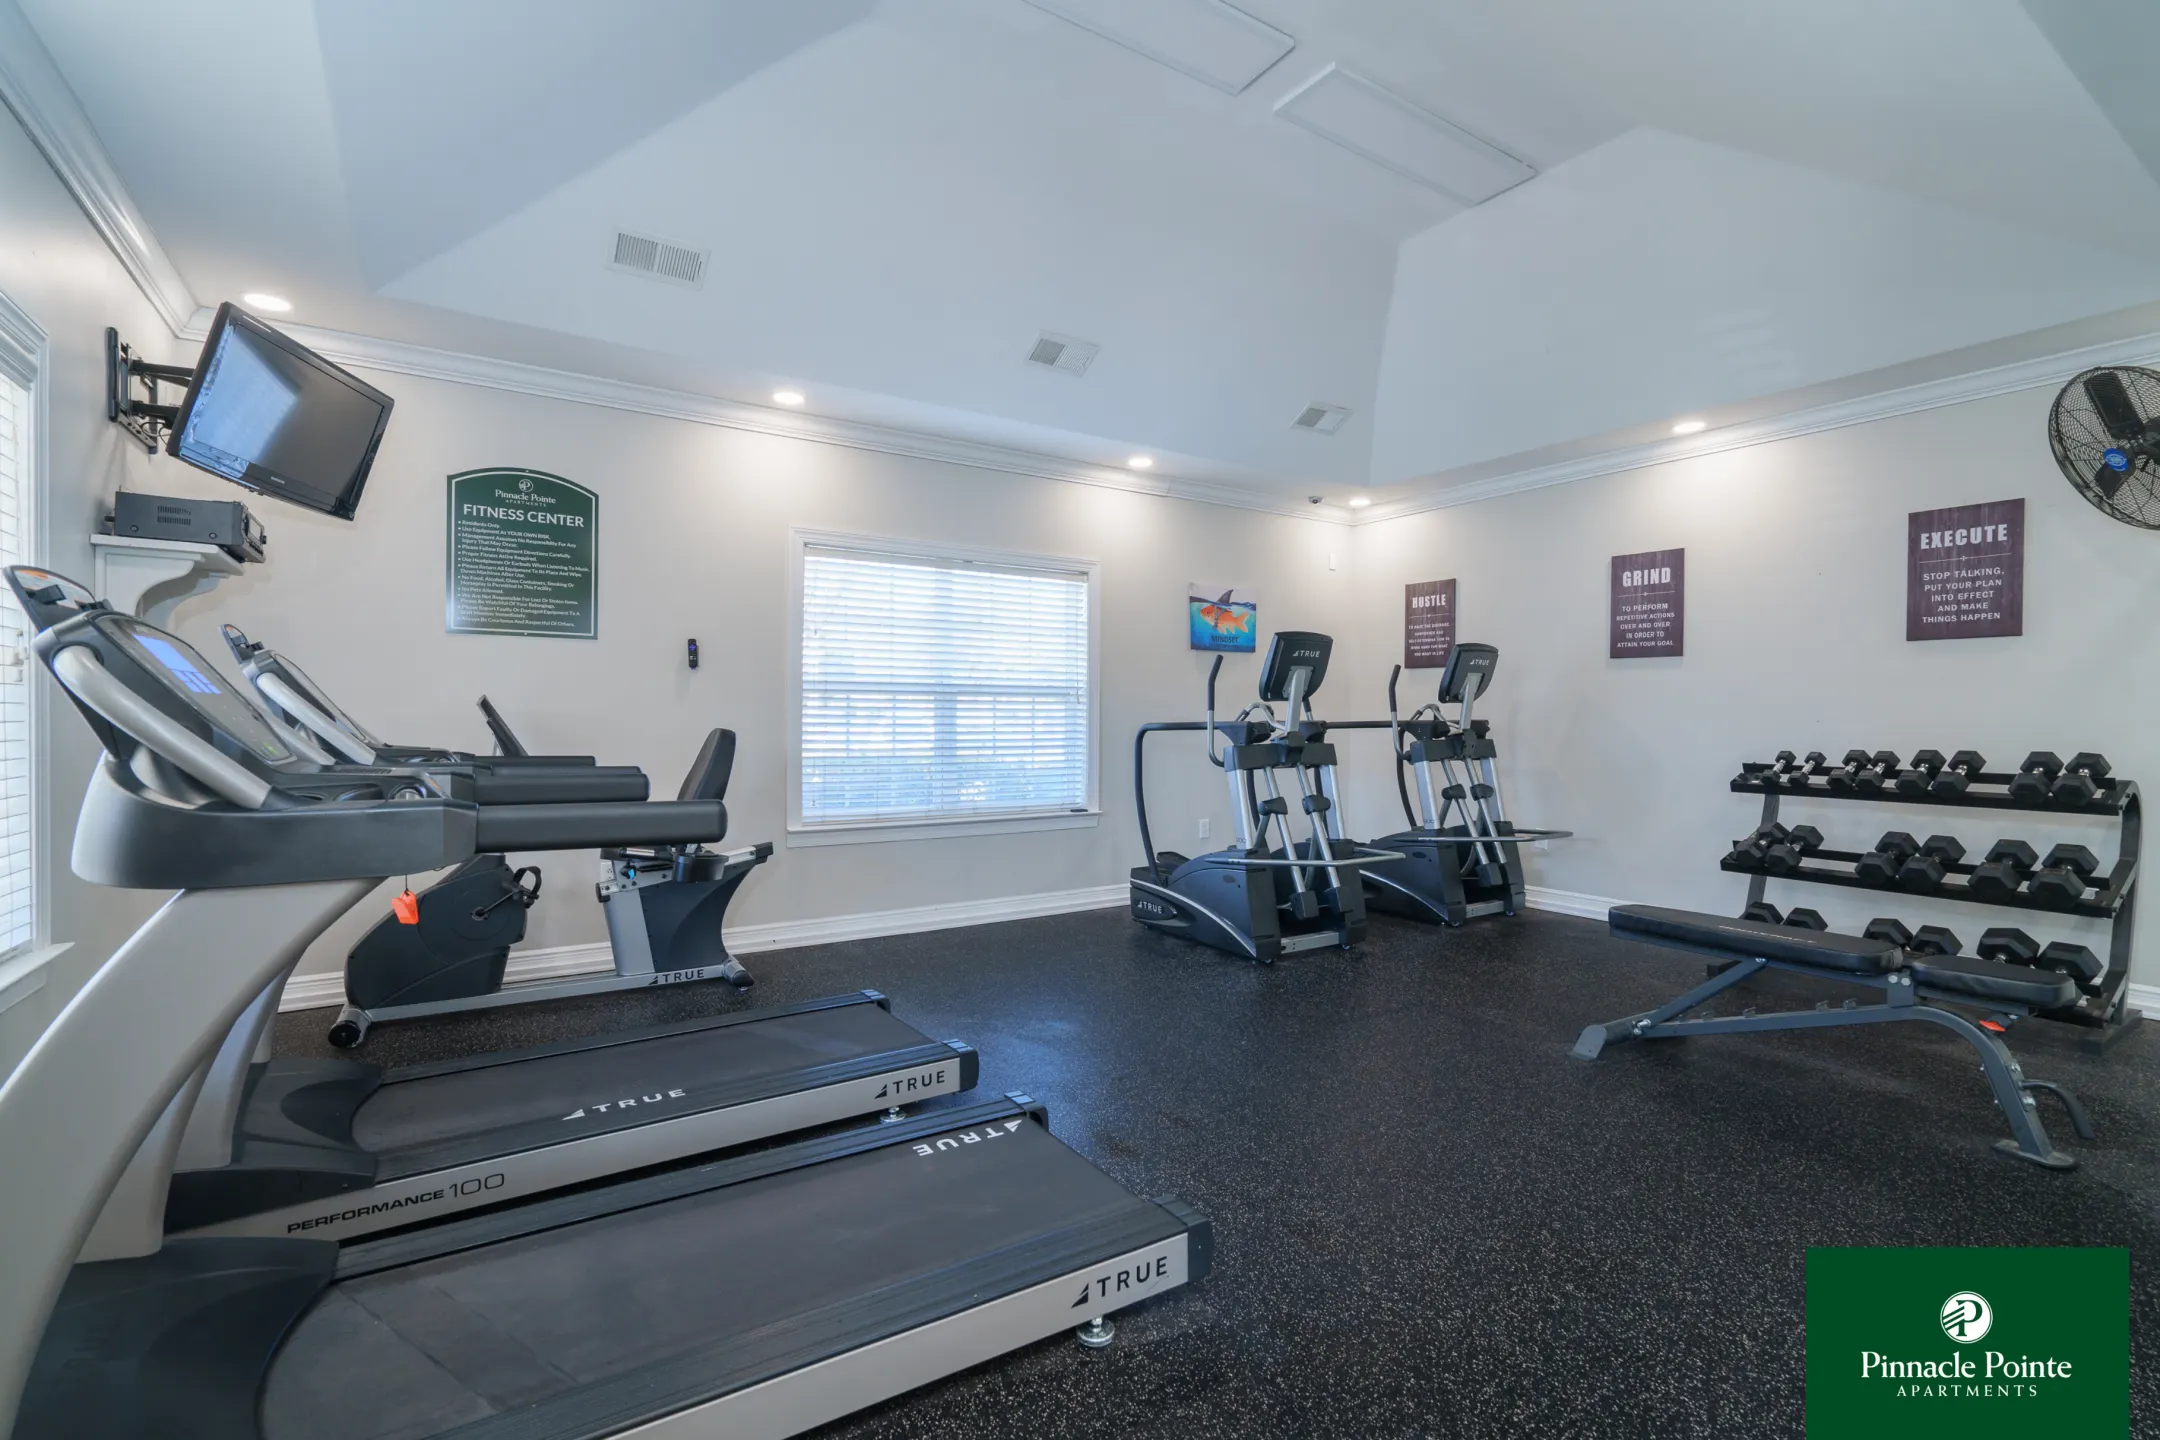 Fitness Weight Room - Pinnacle Pointe Apartments - Crestview, FL